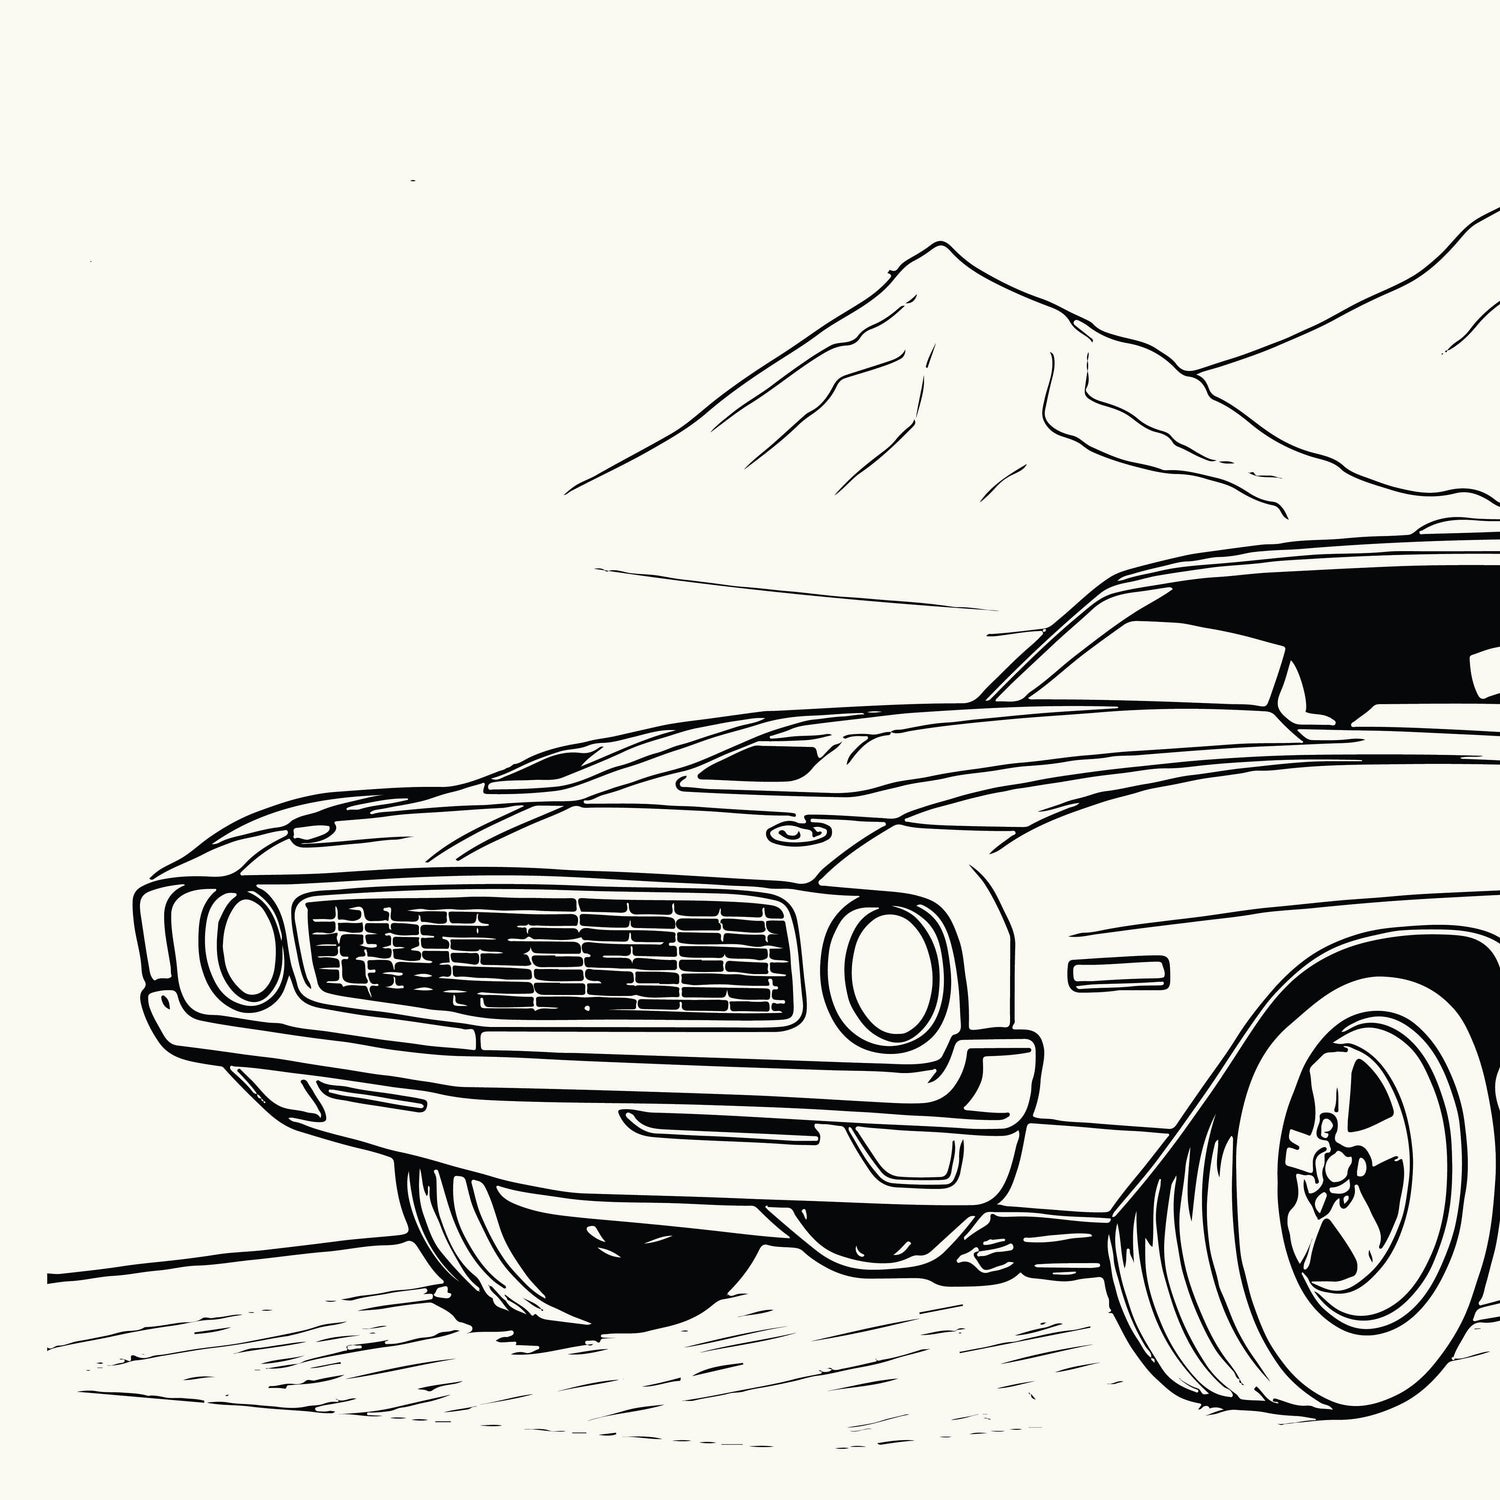 Hot Rod and Classic Car Coloring Book for Kids and Adults